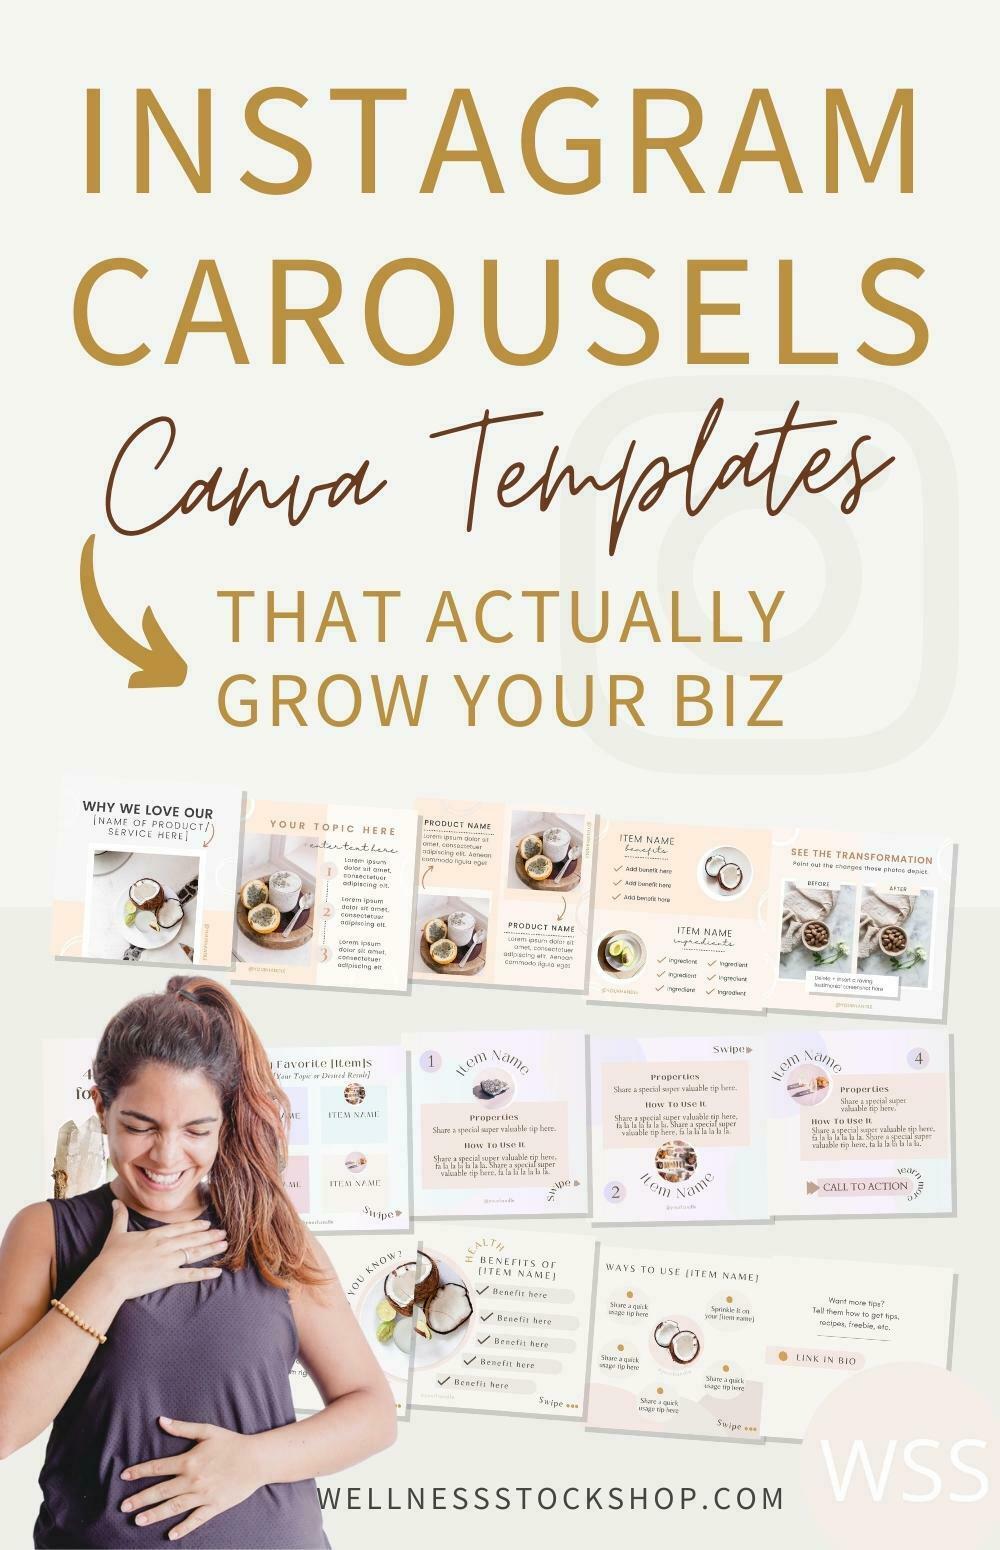 These Instagram carousel Canva templates designed for women business owners